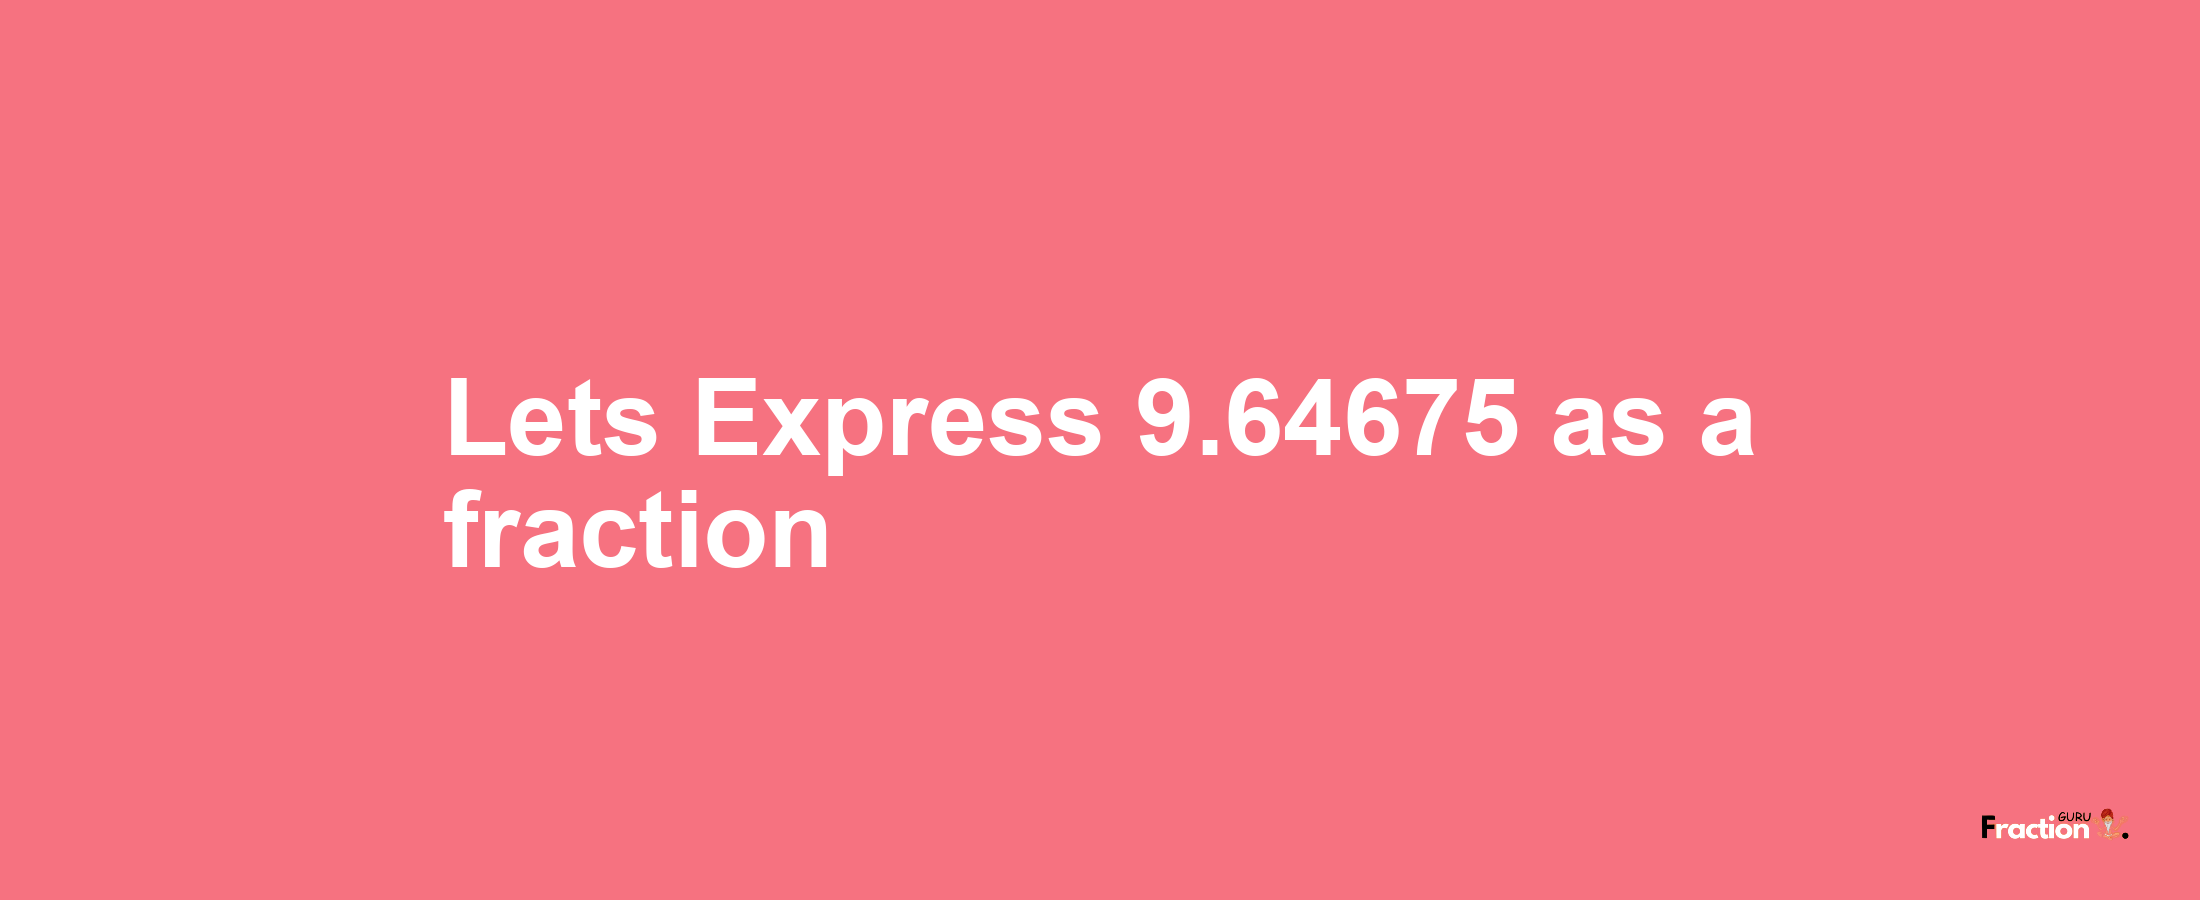 Lets Express 9.64675 as afraction